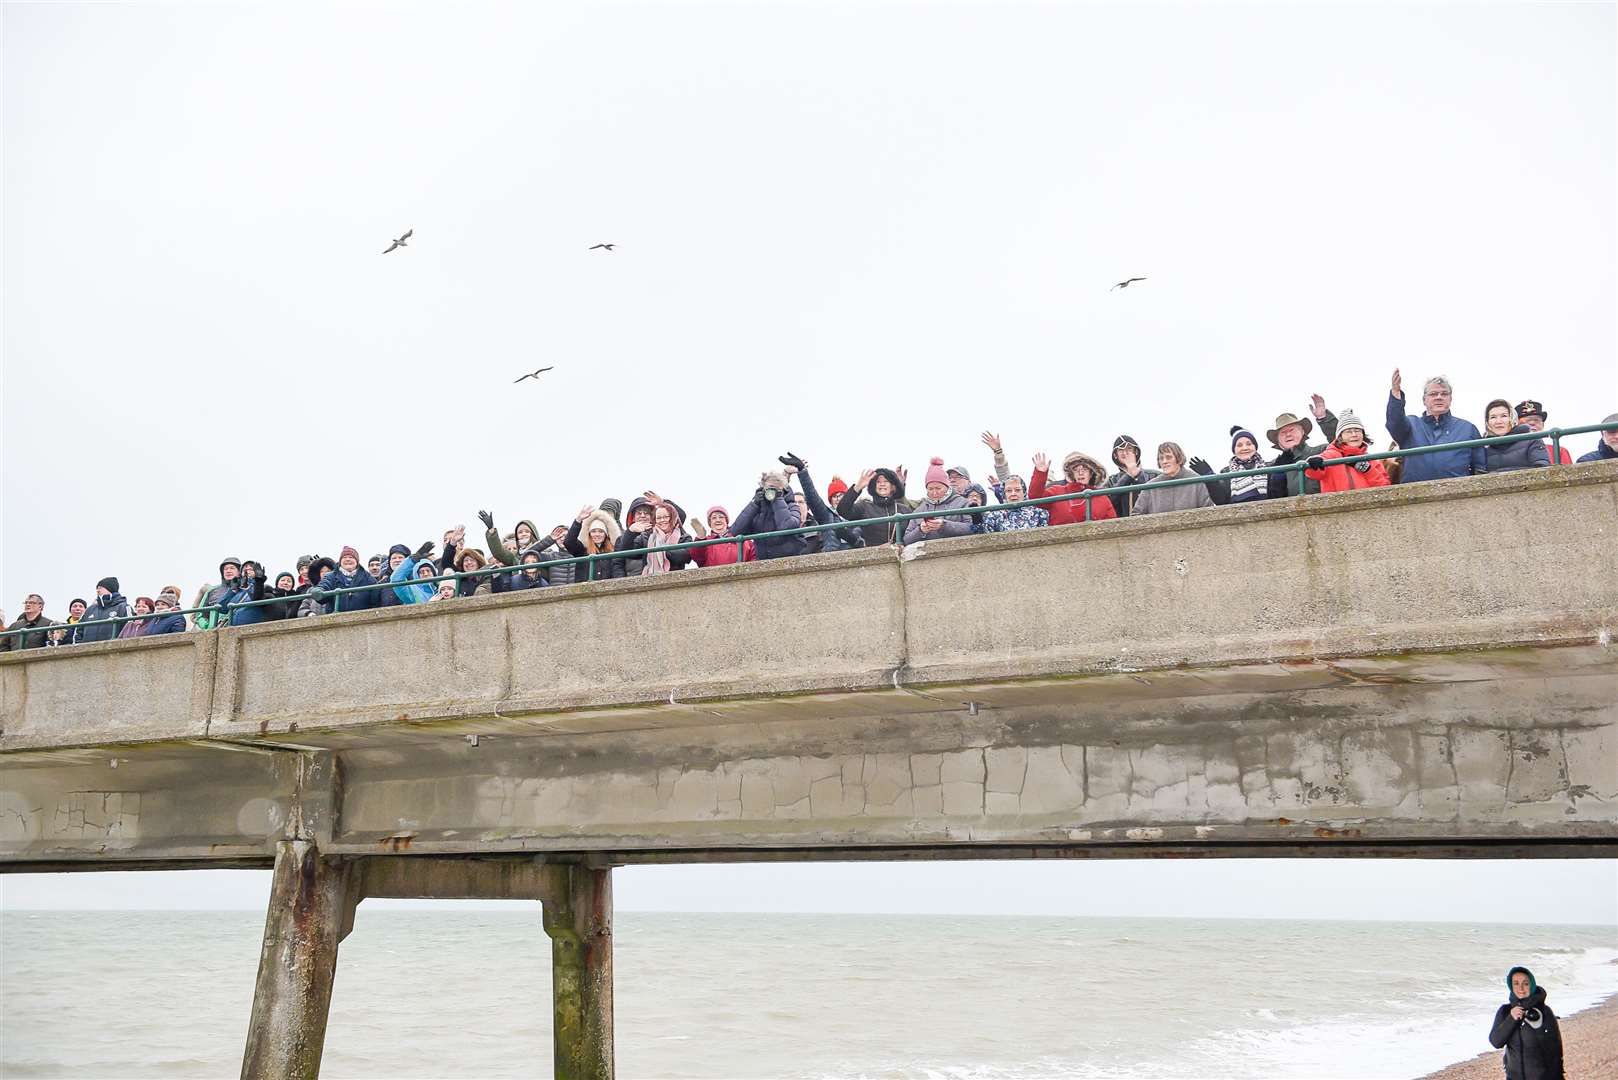 Thousands of spectators usually turn out on the pier or beach